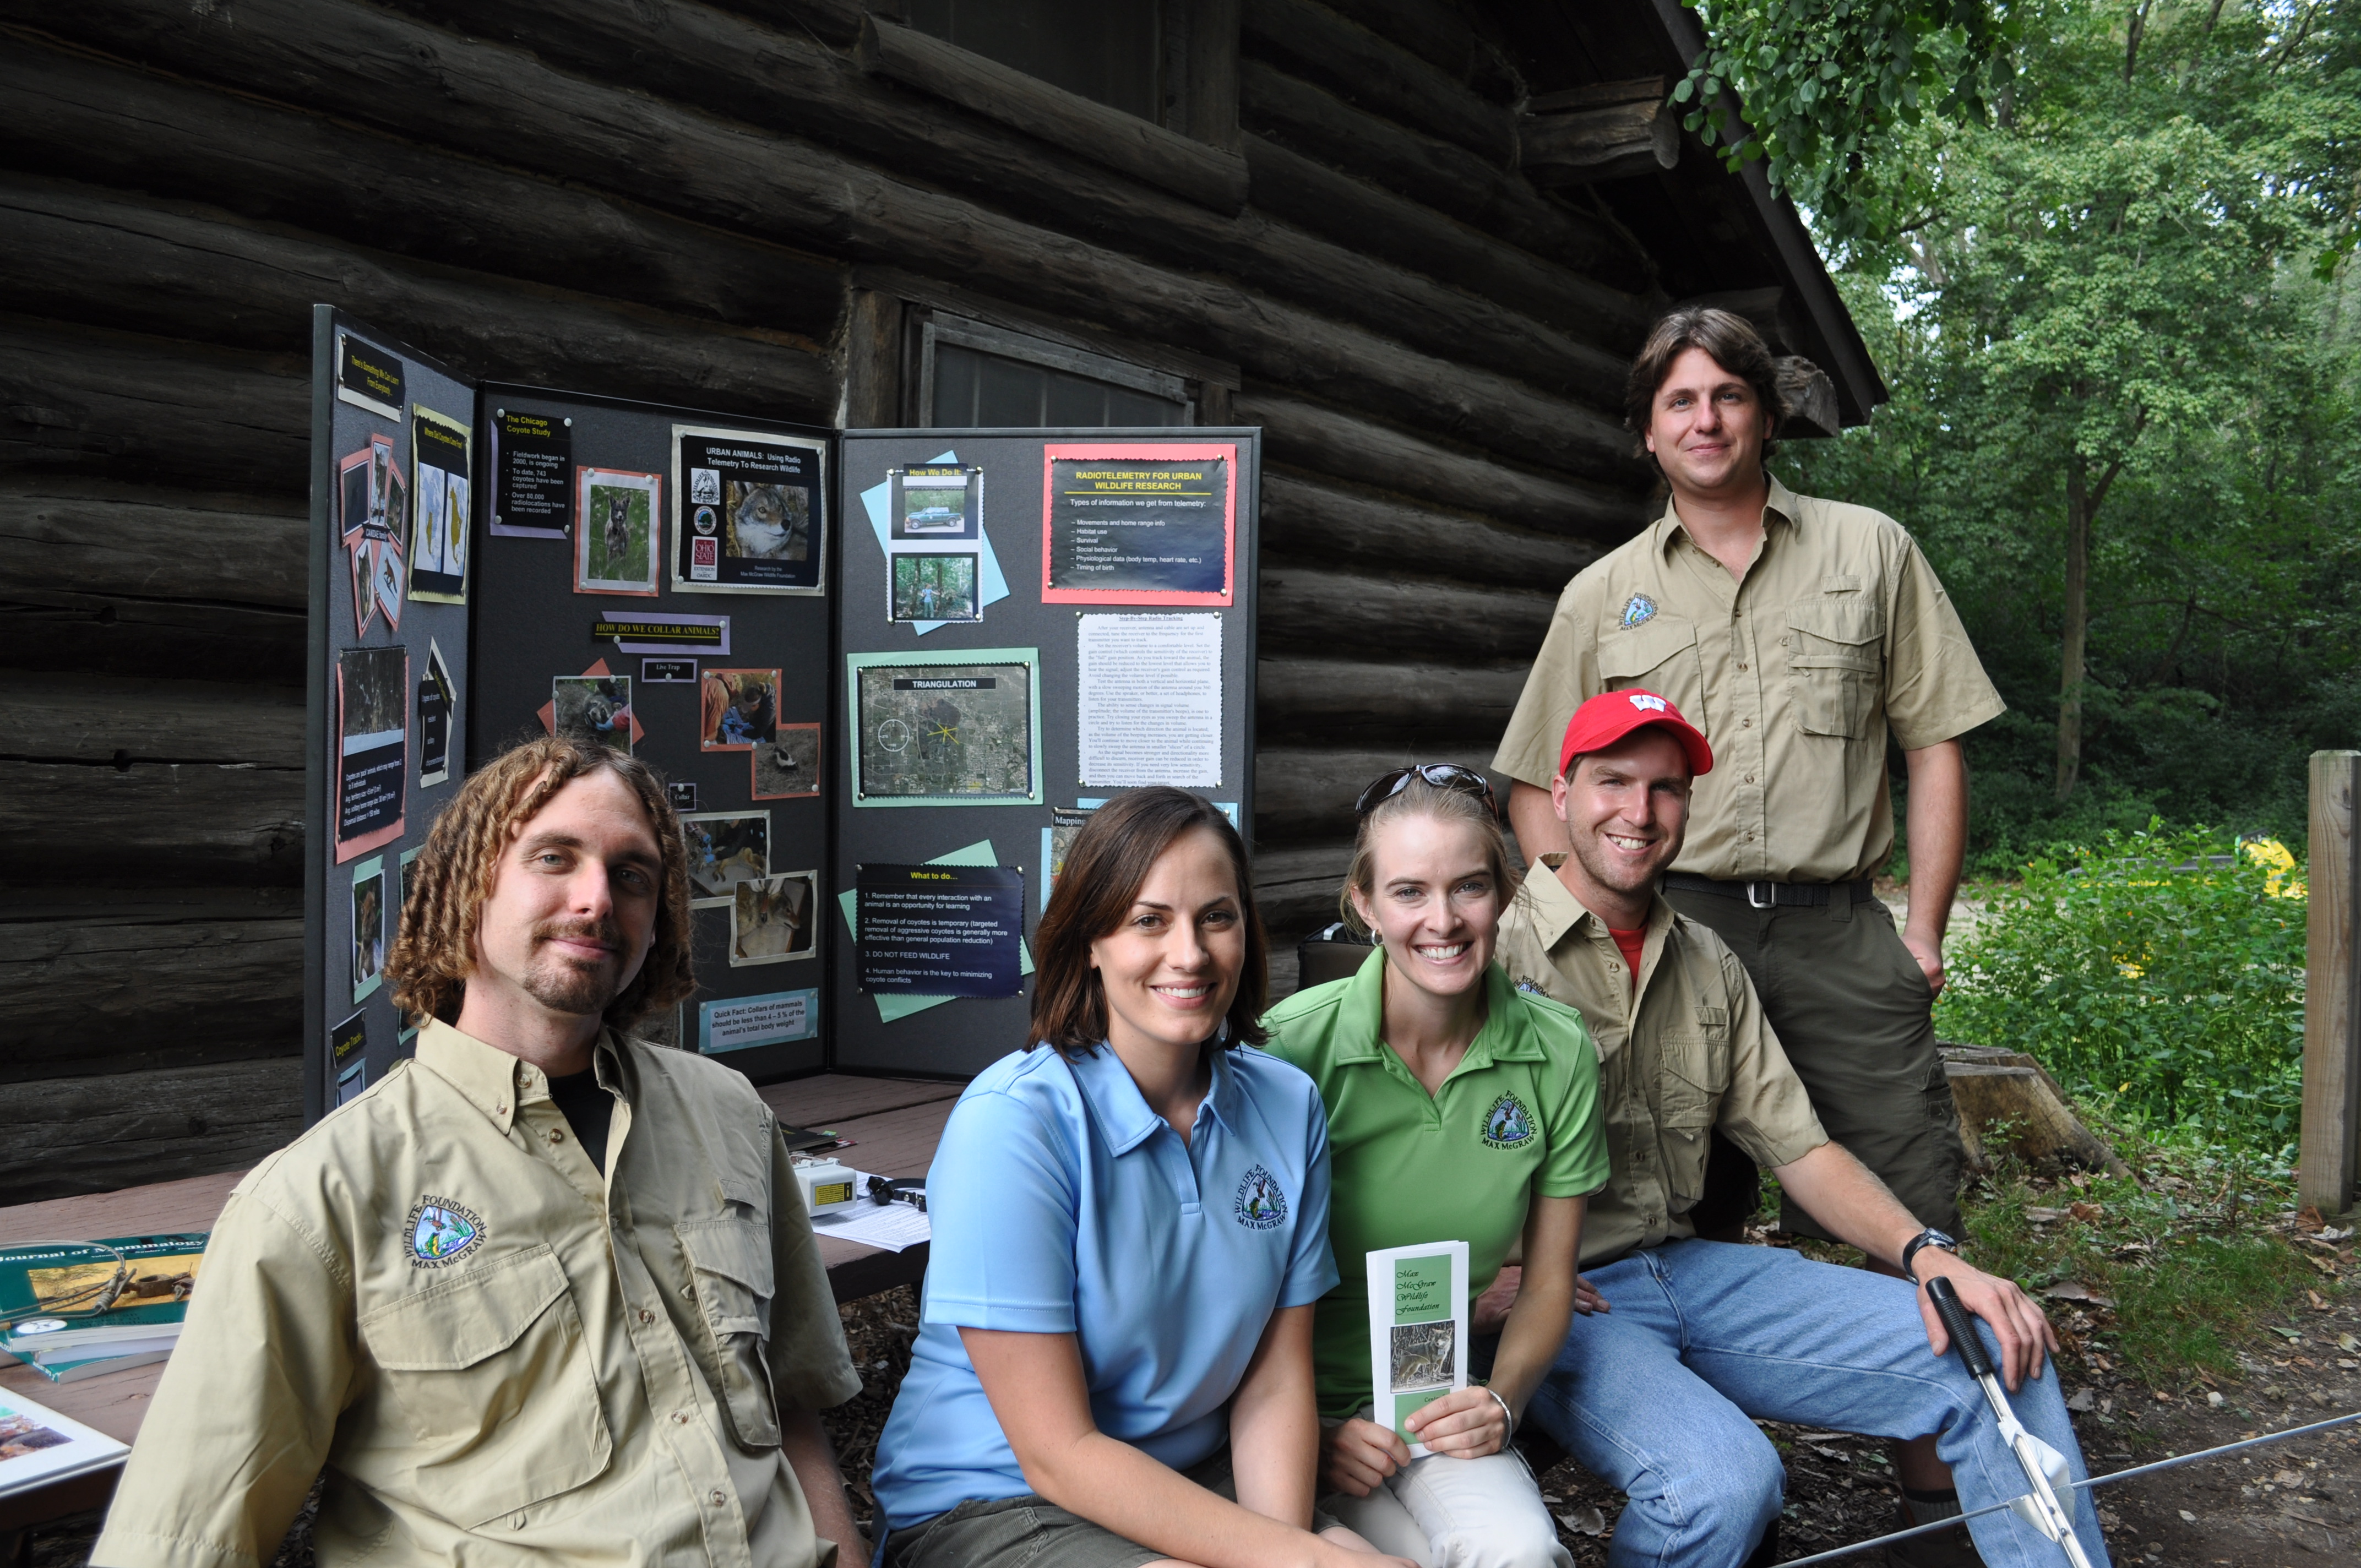 Some of the research team doing educational outreach